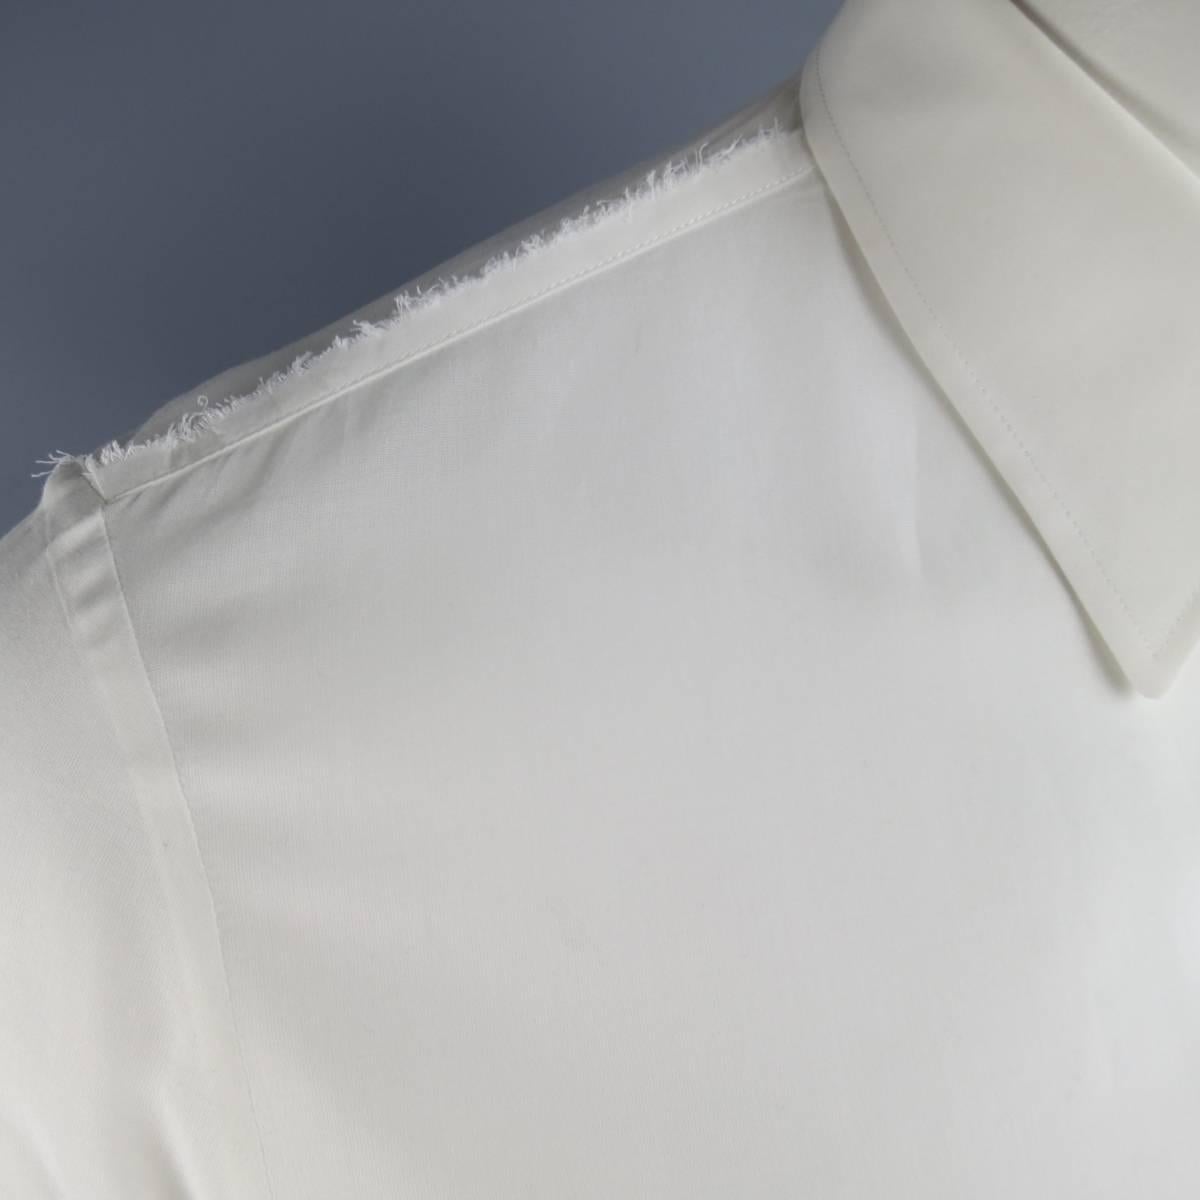 Light weight MAISON MARTIN MARGIELA dress shirt in an ultra sheer white cotton material featuring a pointed collar, cut off faux pocket applique, and frayed edge trim details. Made in Italy.
 
Excellent Pre-Owned Condition.
Marked: III
